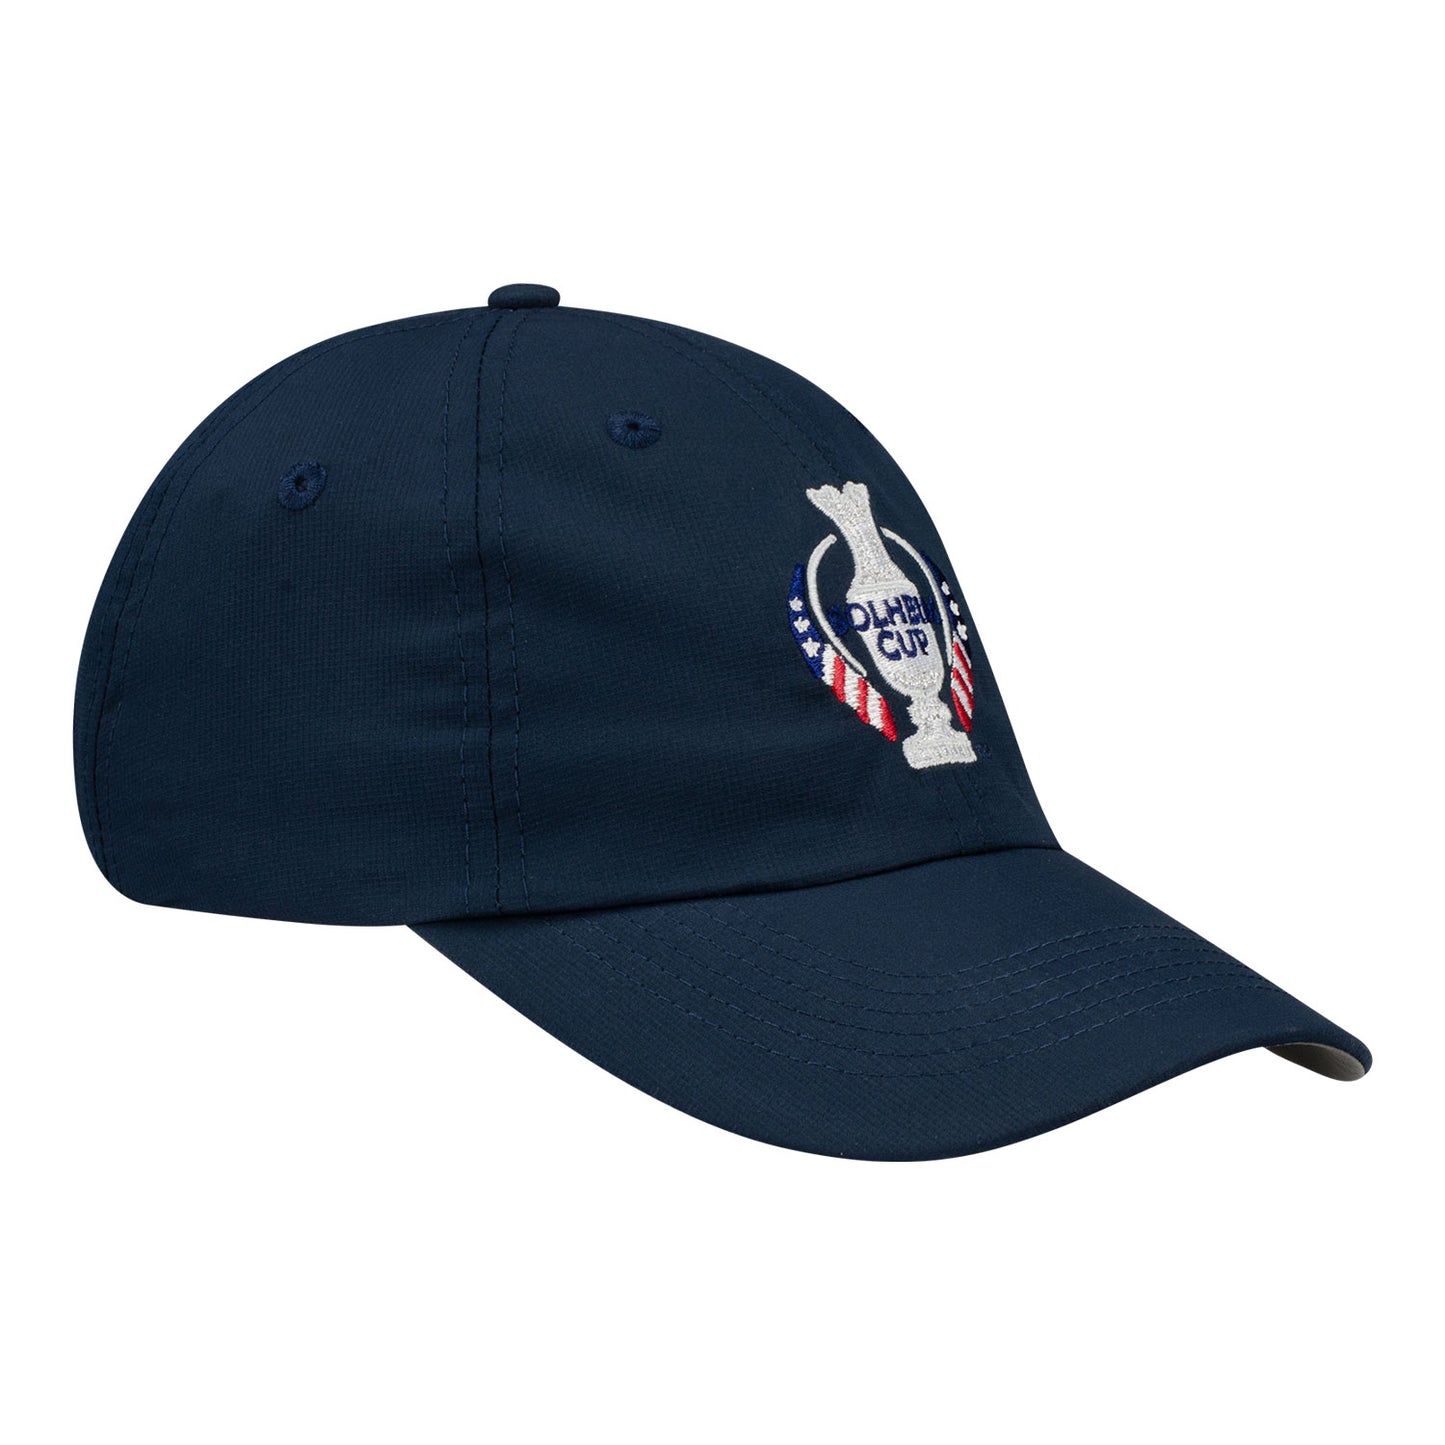 Imperial LPGA Official Solheim Cup Fan Wear in Navy - Angled Right Side View